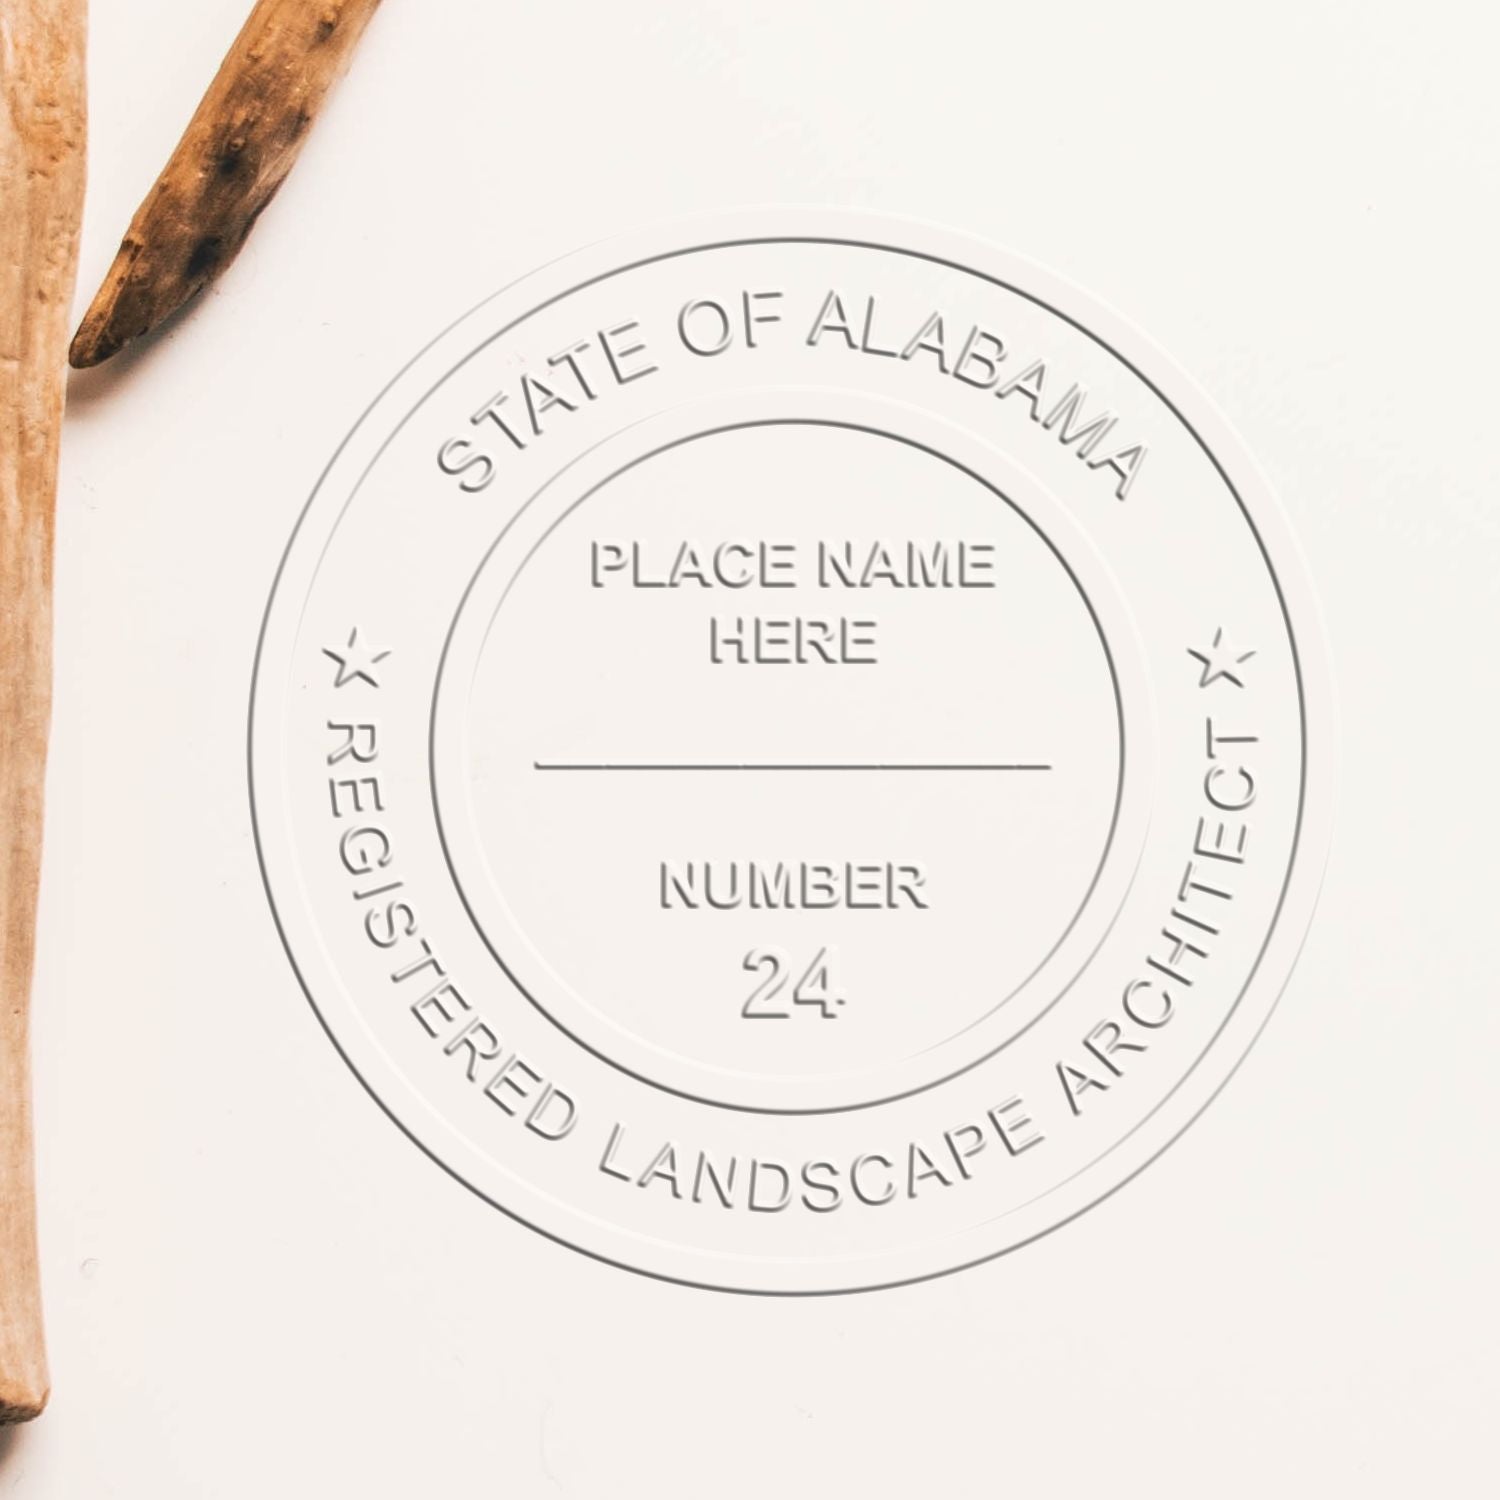 A stamped impression of the State of Alabama Handheld Landscape Architect Seal in this stylish lifestyle photo, setting the tone for a unique and personalized product.